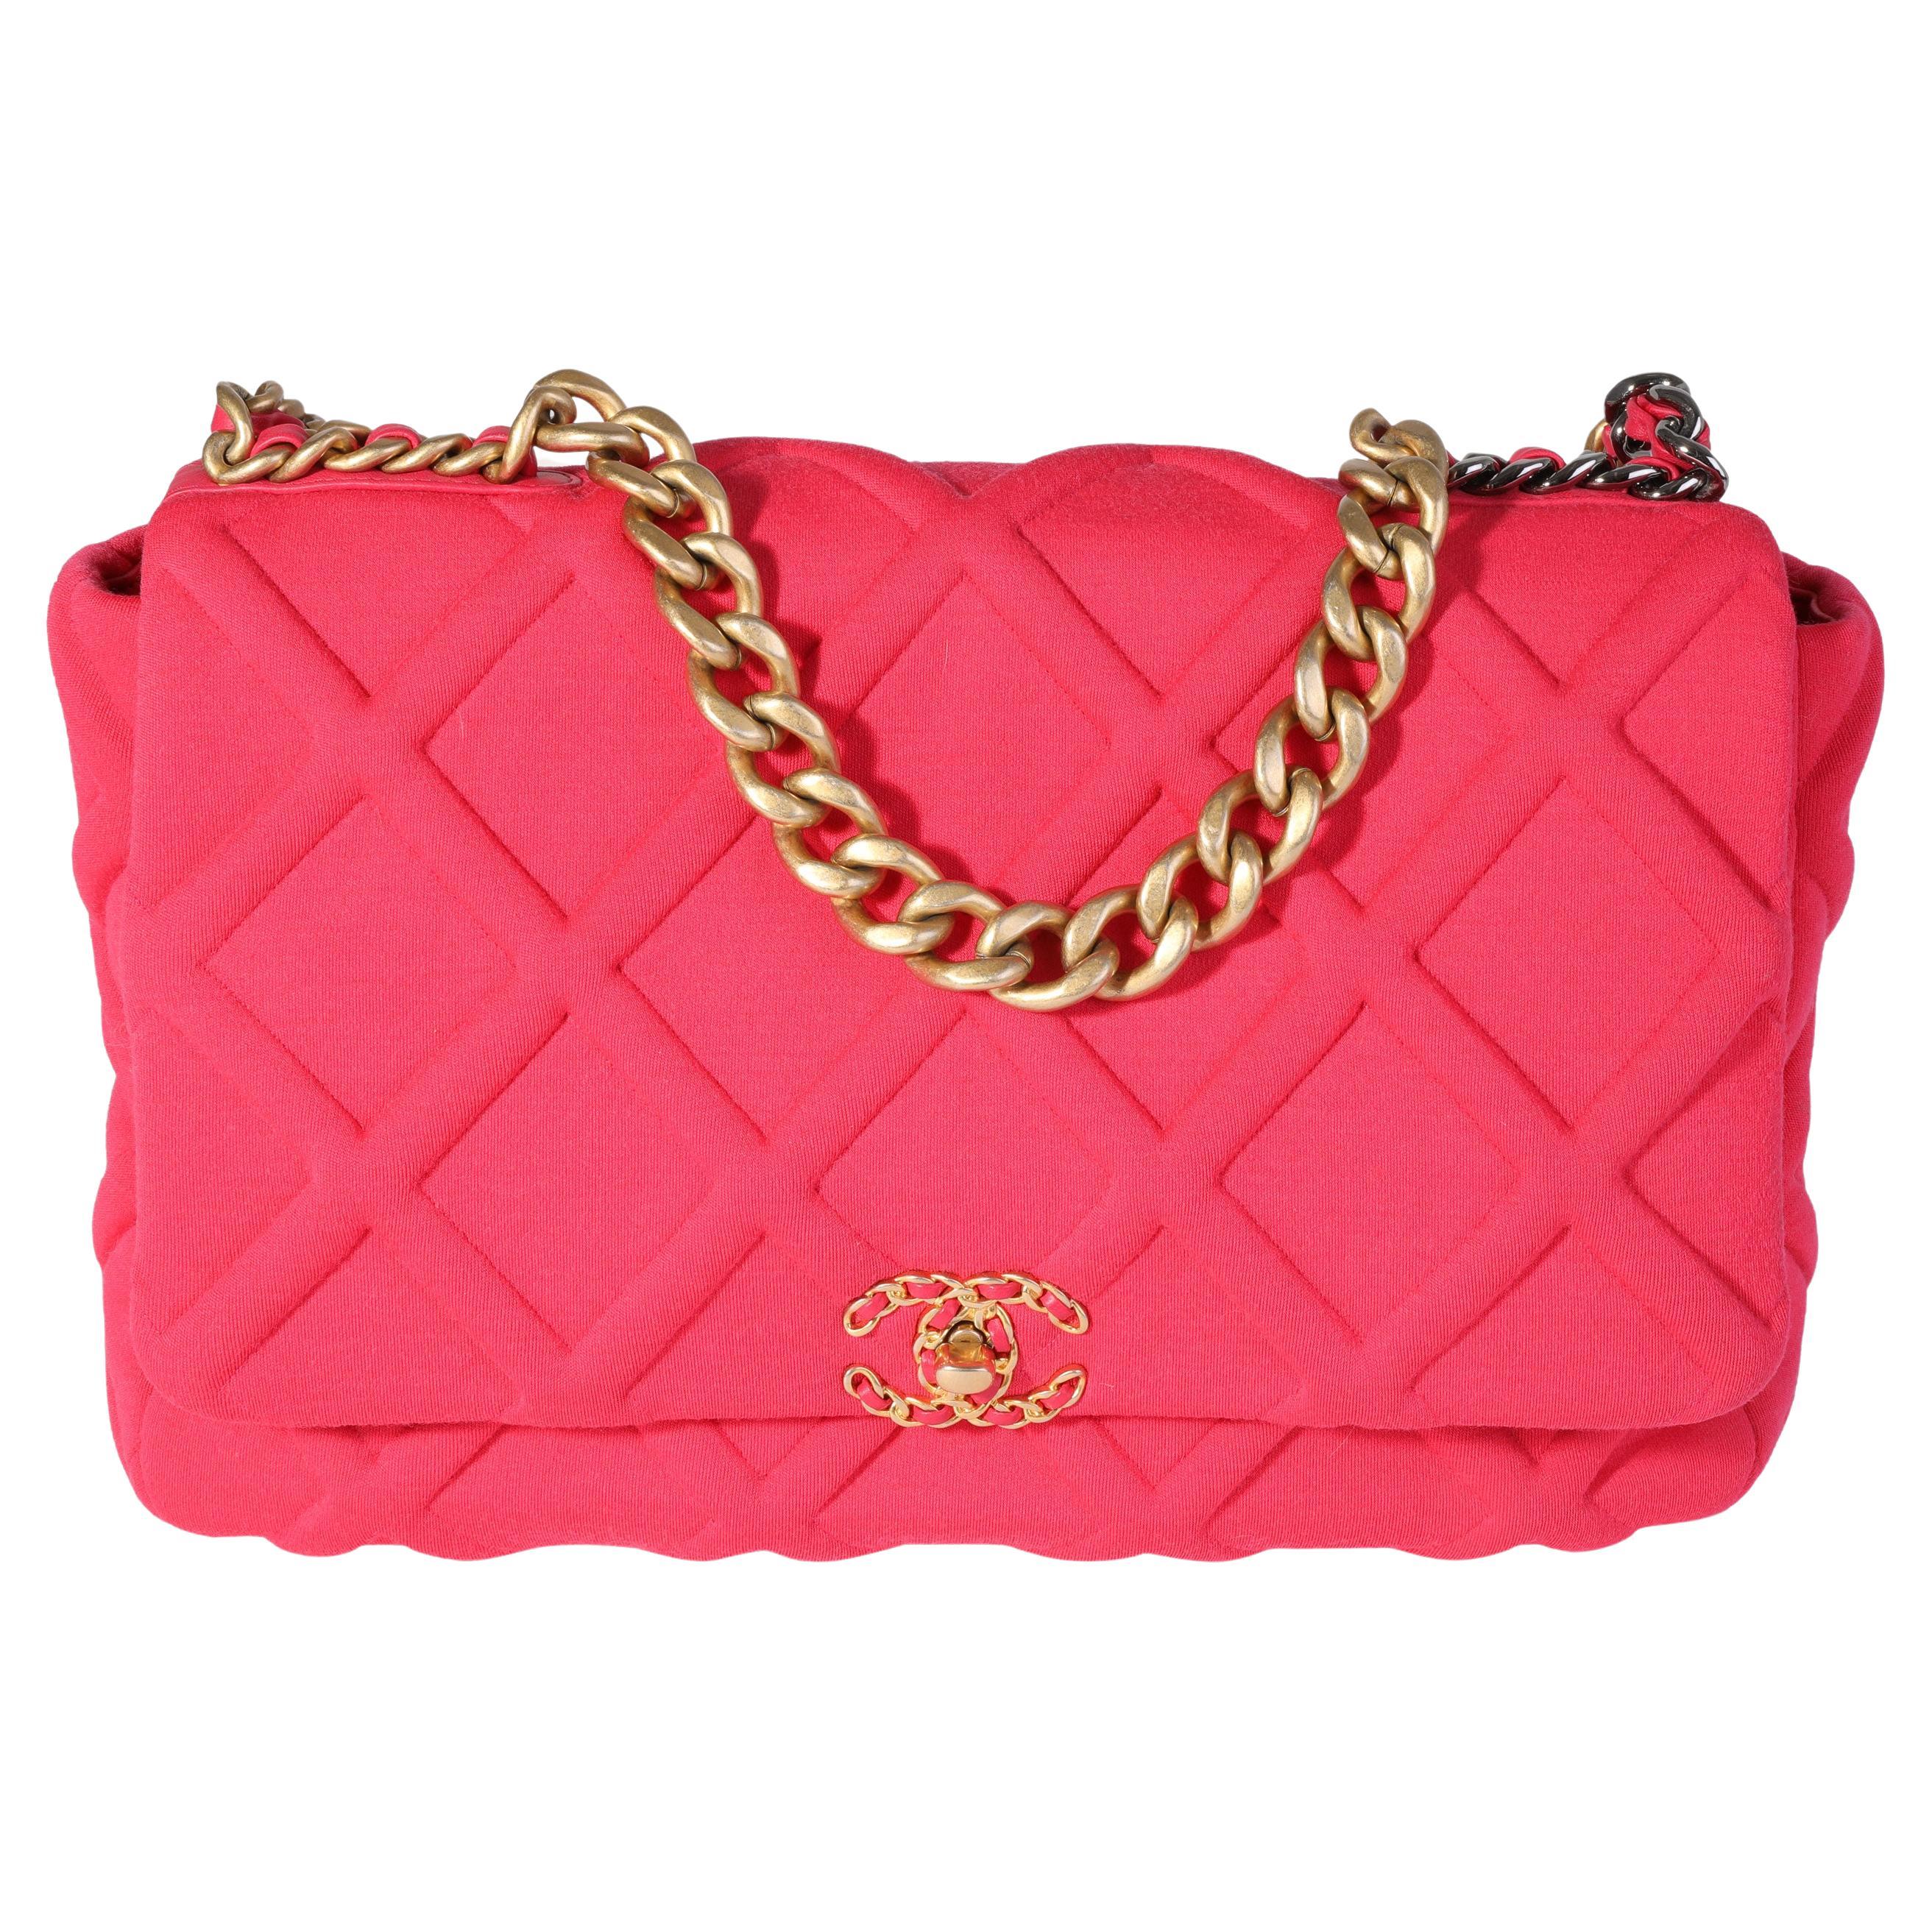 Chanel Hot Pink Quilted Jersey Large Chanel 19 Flap Bag